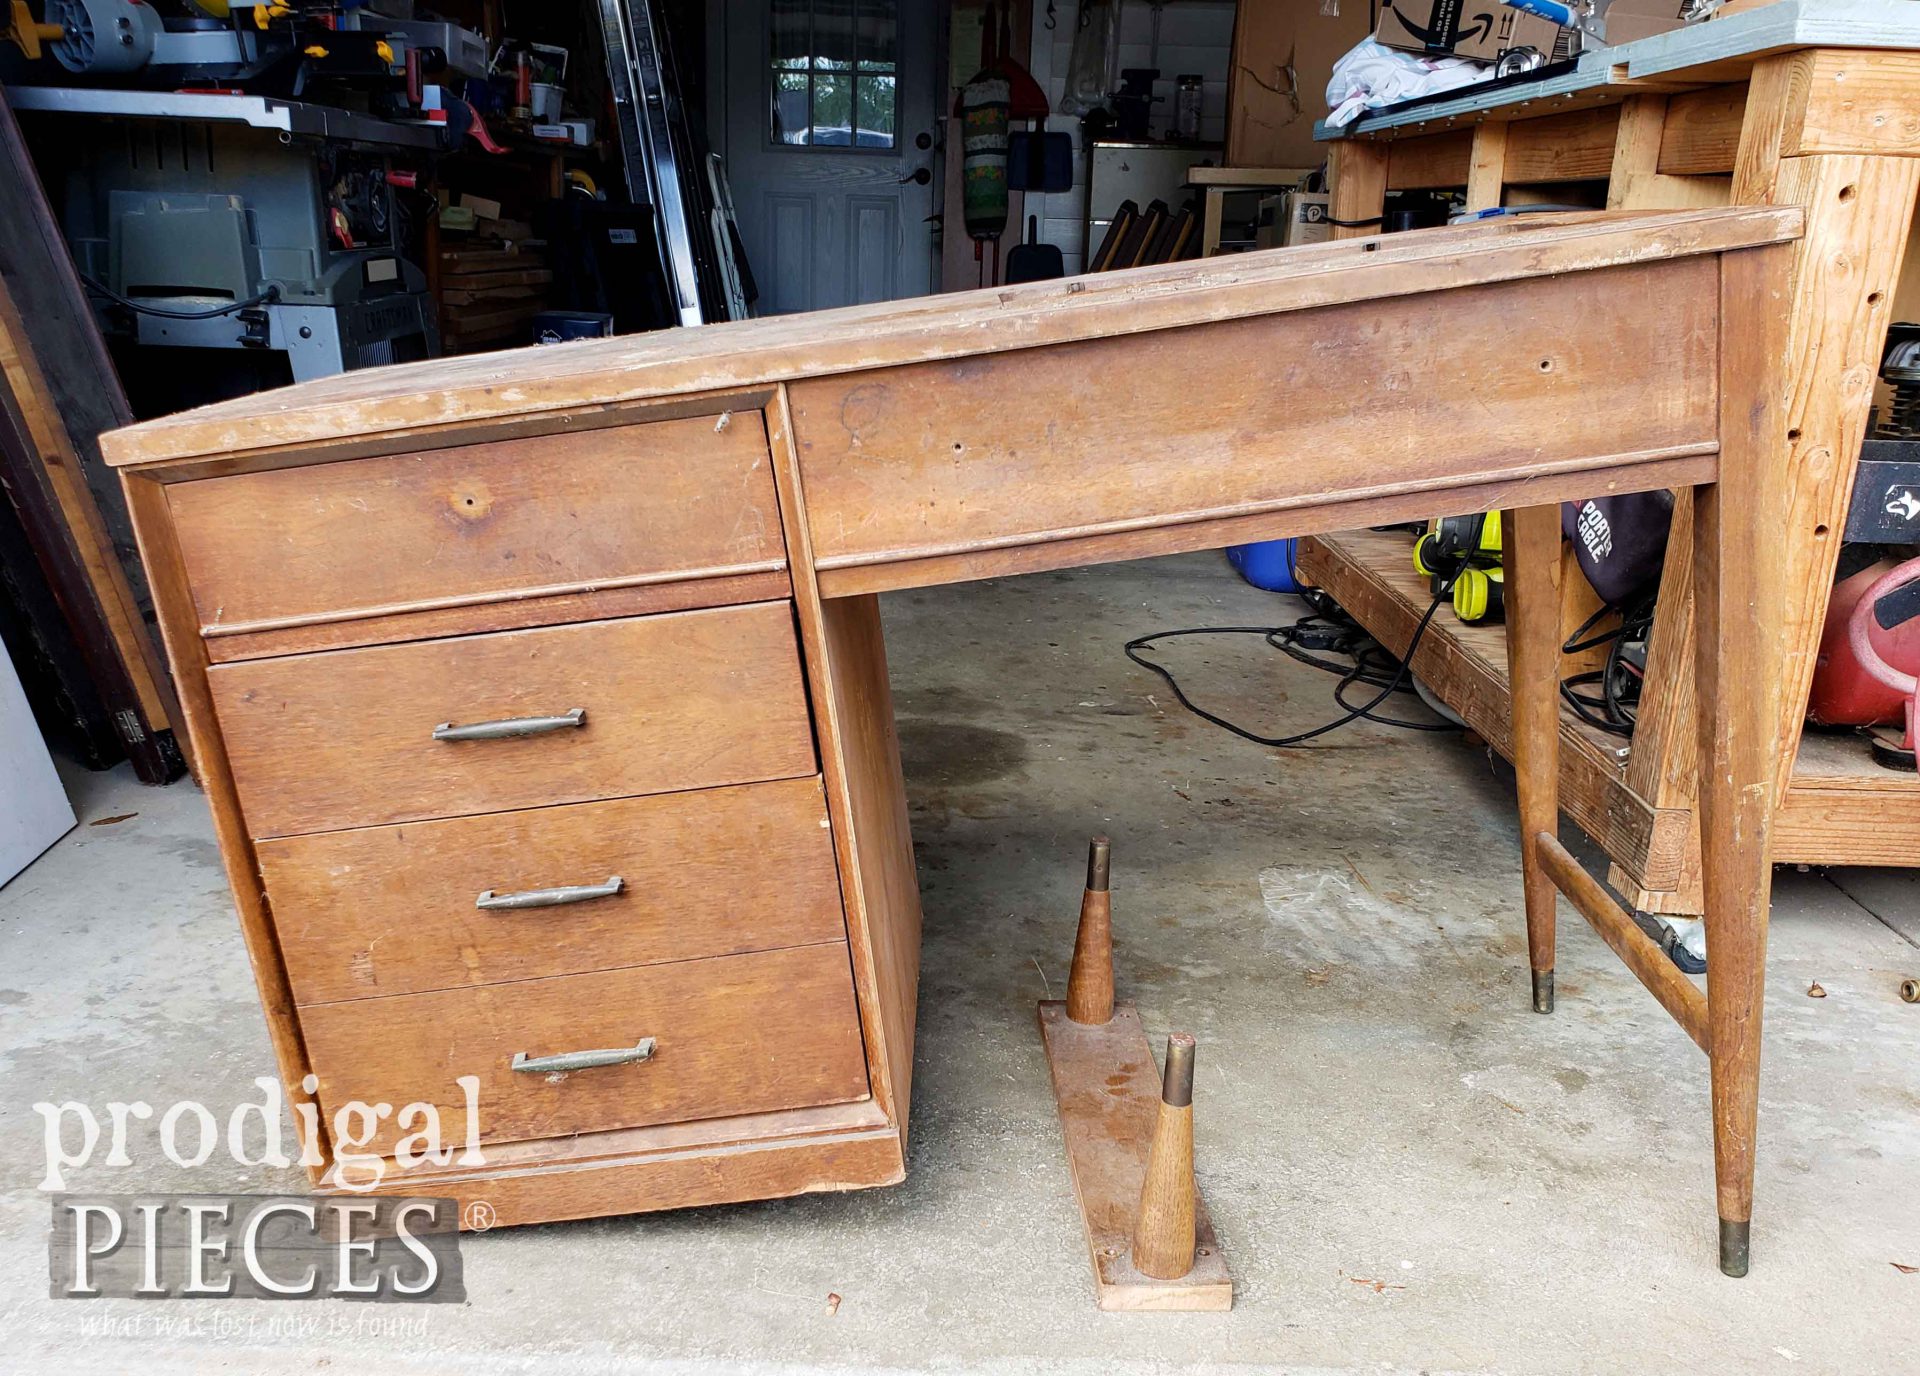 Mid Century Modern Sewing Desk Before Makeover by Larissa of Prodigal Pieces | prodigalpieces.com #prodigalpieces